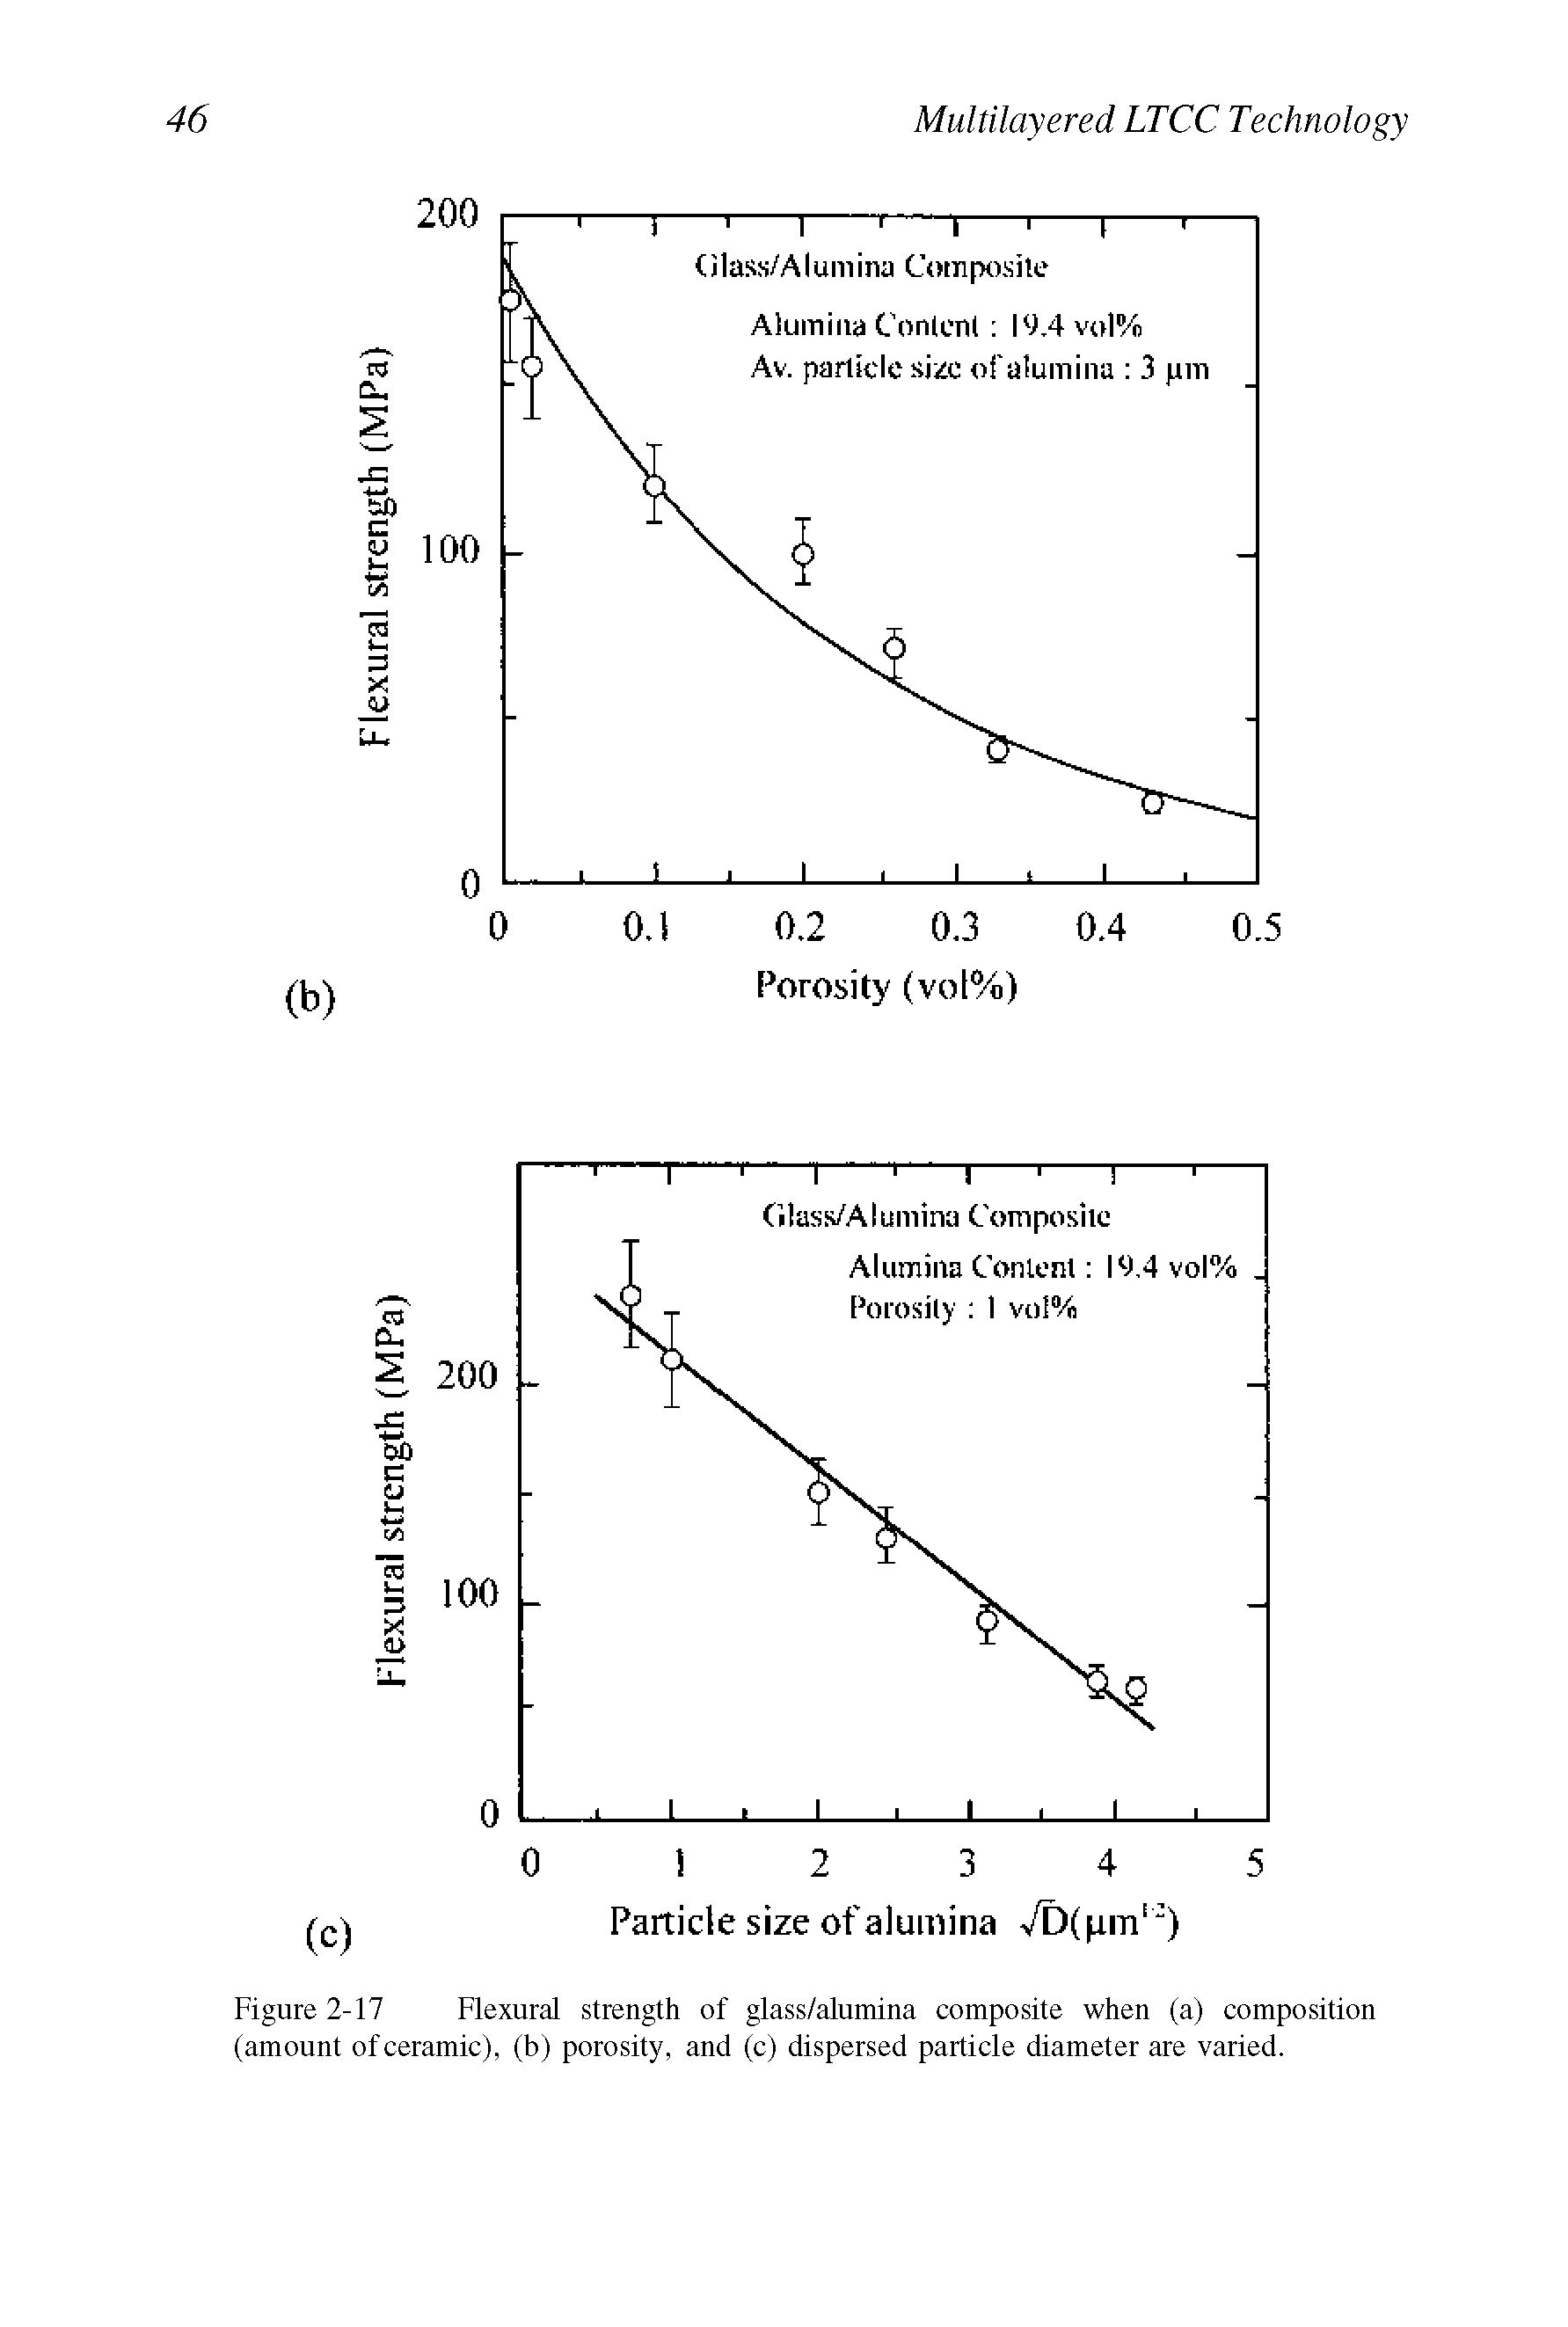 Figure 2-17 Flexural strength of glass/alumina composite when (a) composition (amount of ceramic), (b) porosity, and (c) dispersed particle diameter are varied.